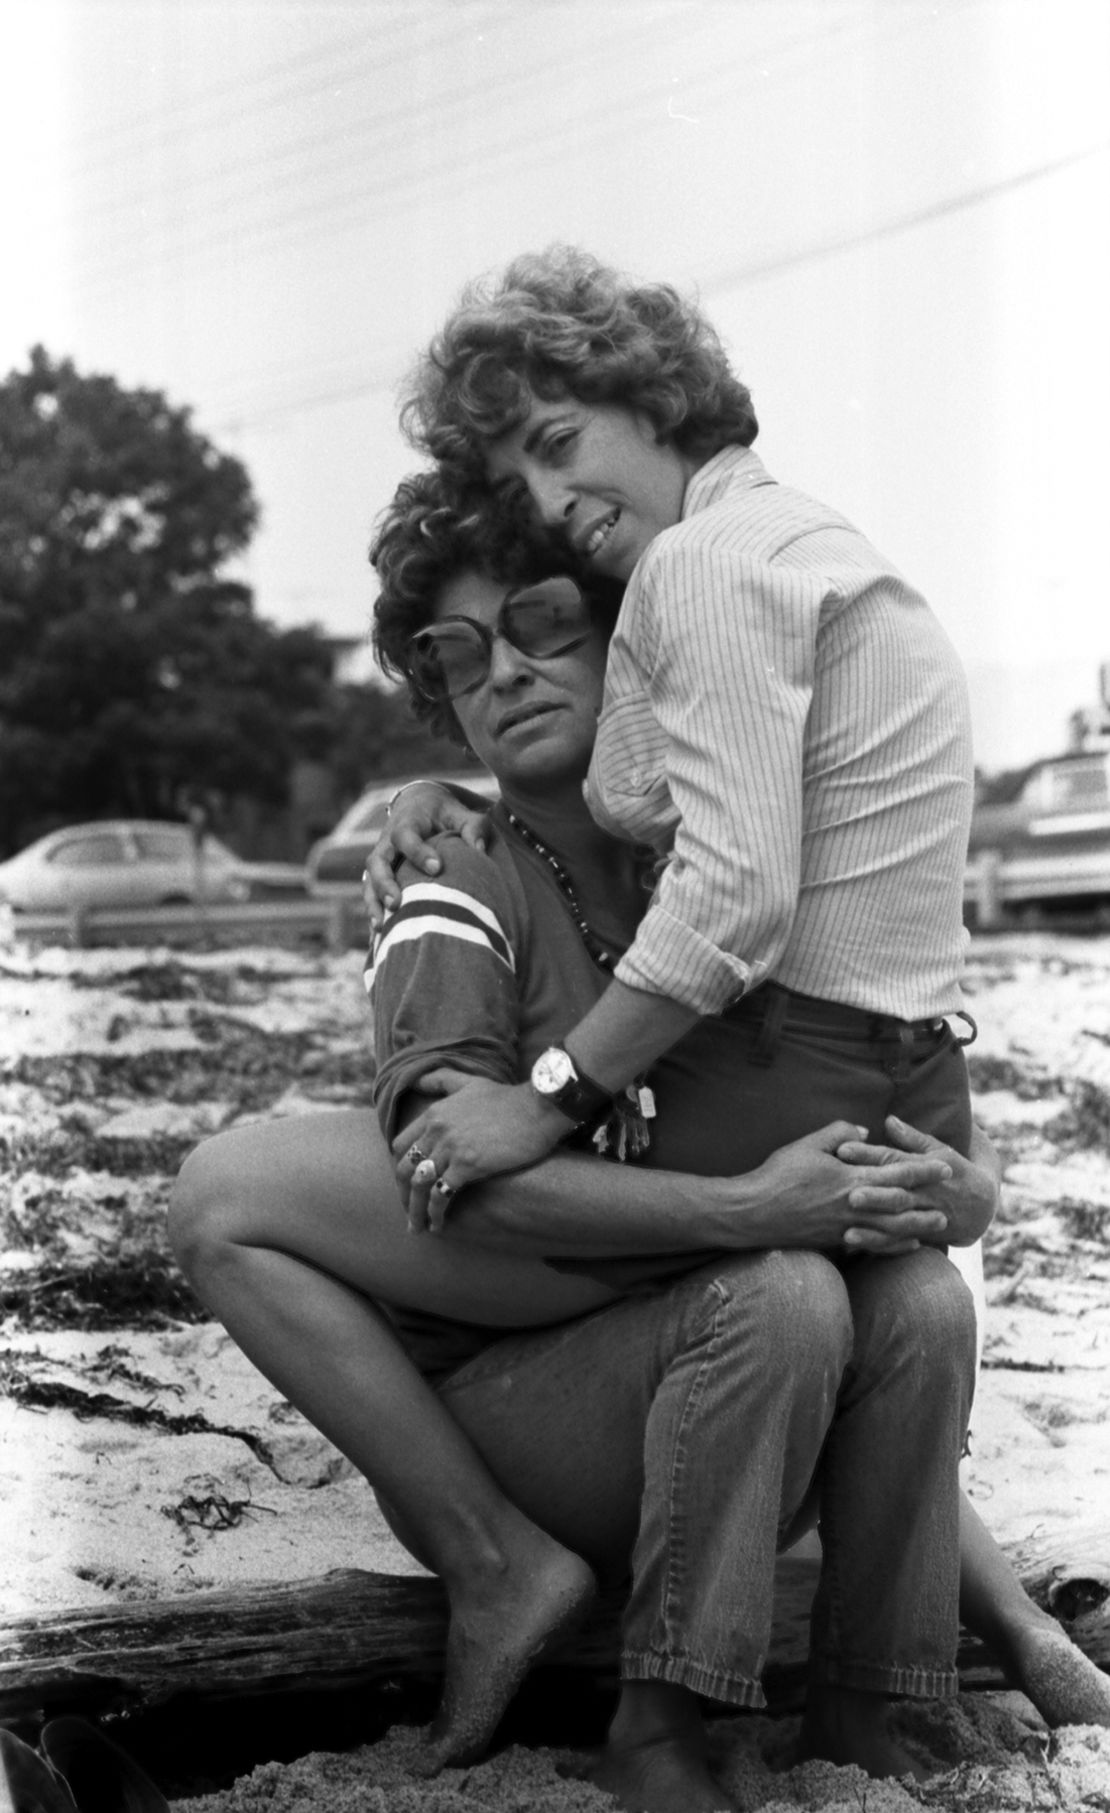 "Helaine on her girlfriend's lap, Provincetown" (1974)